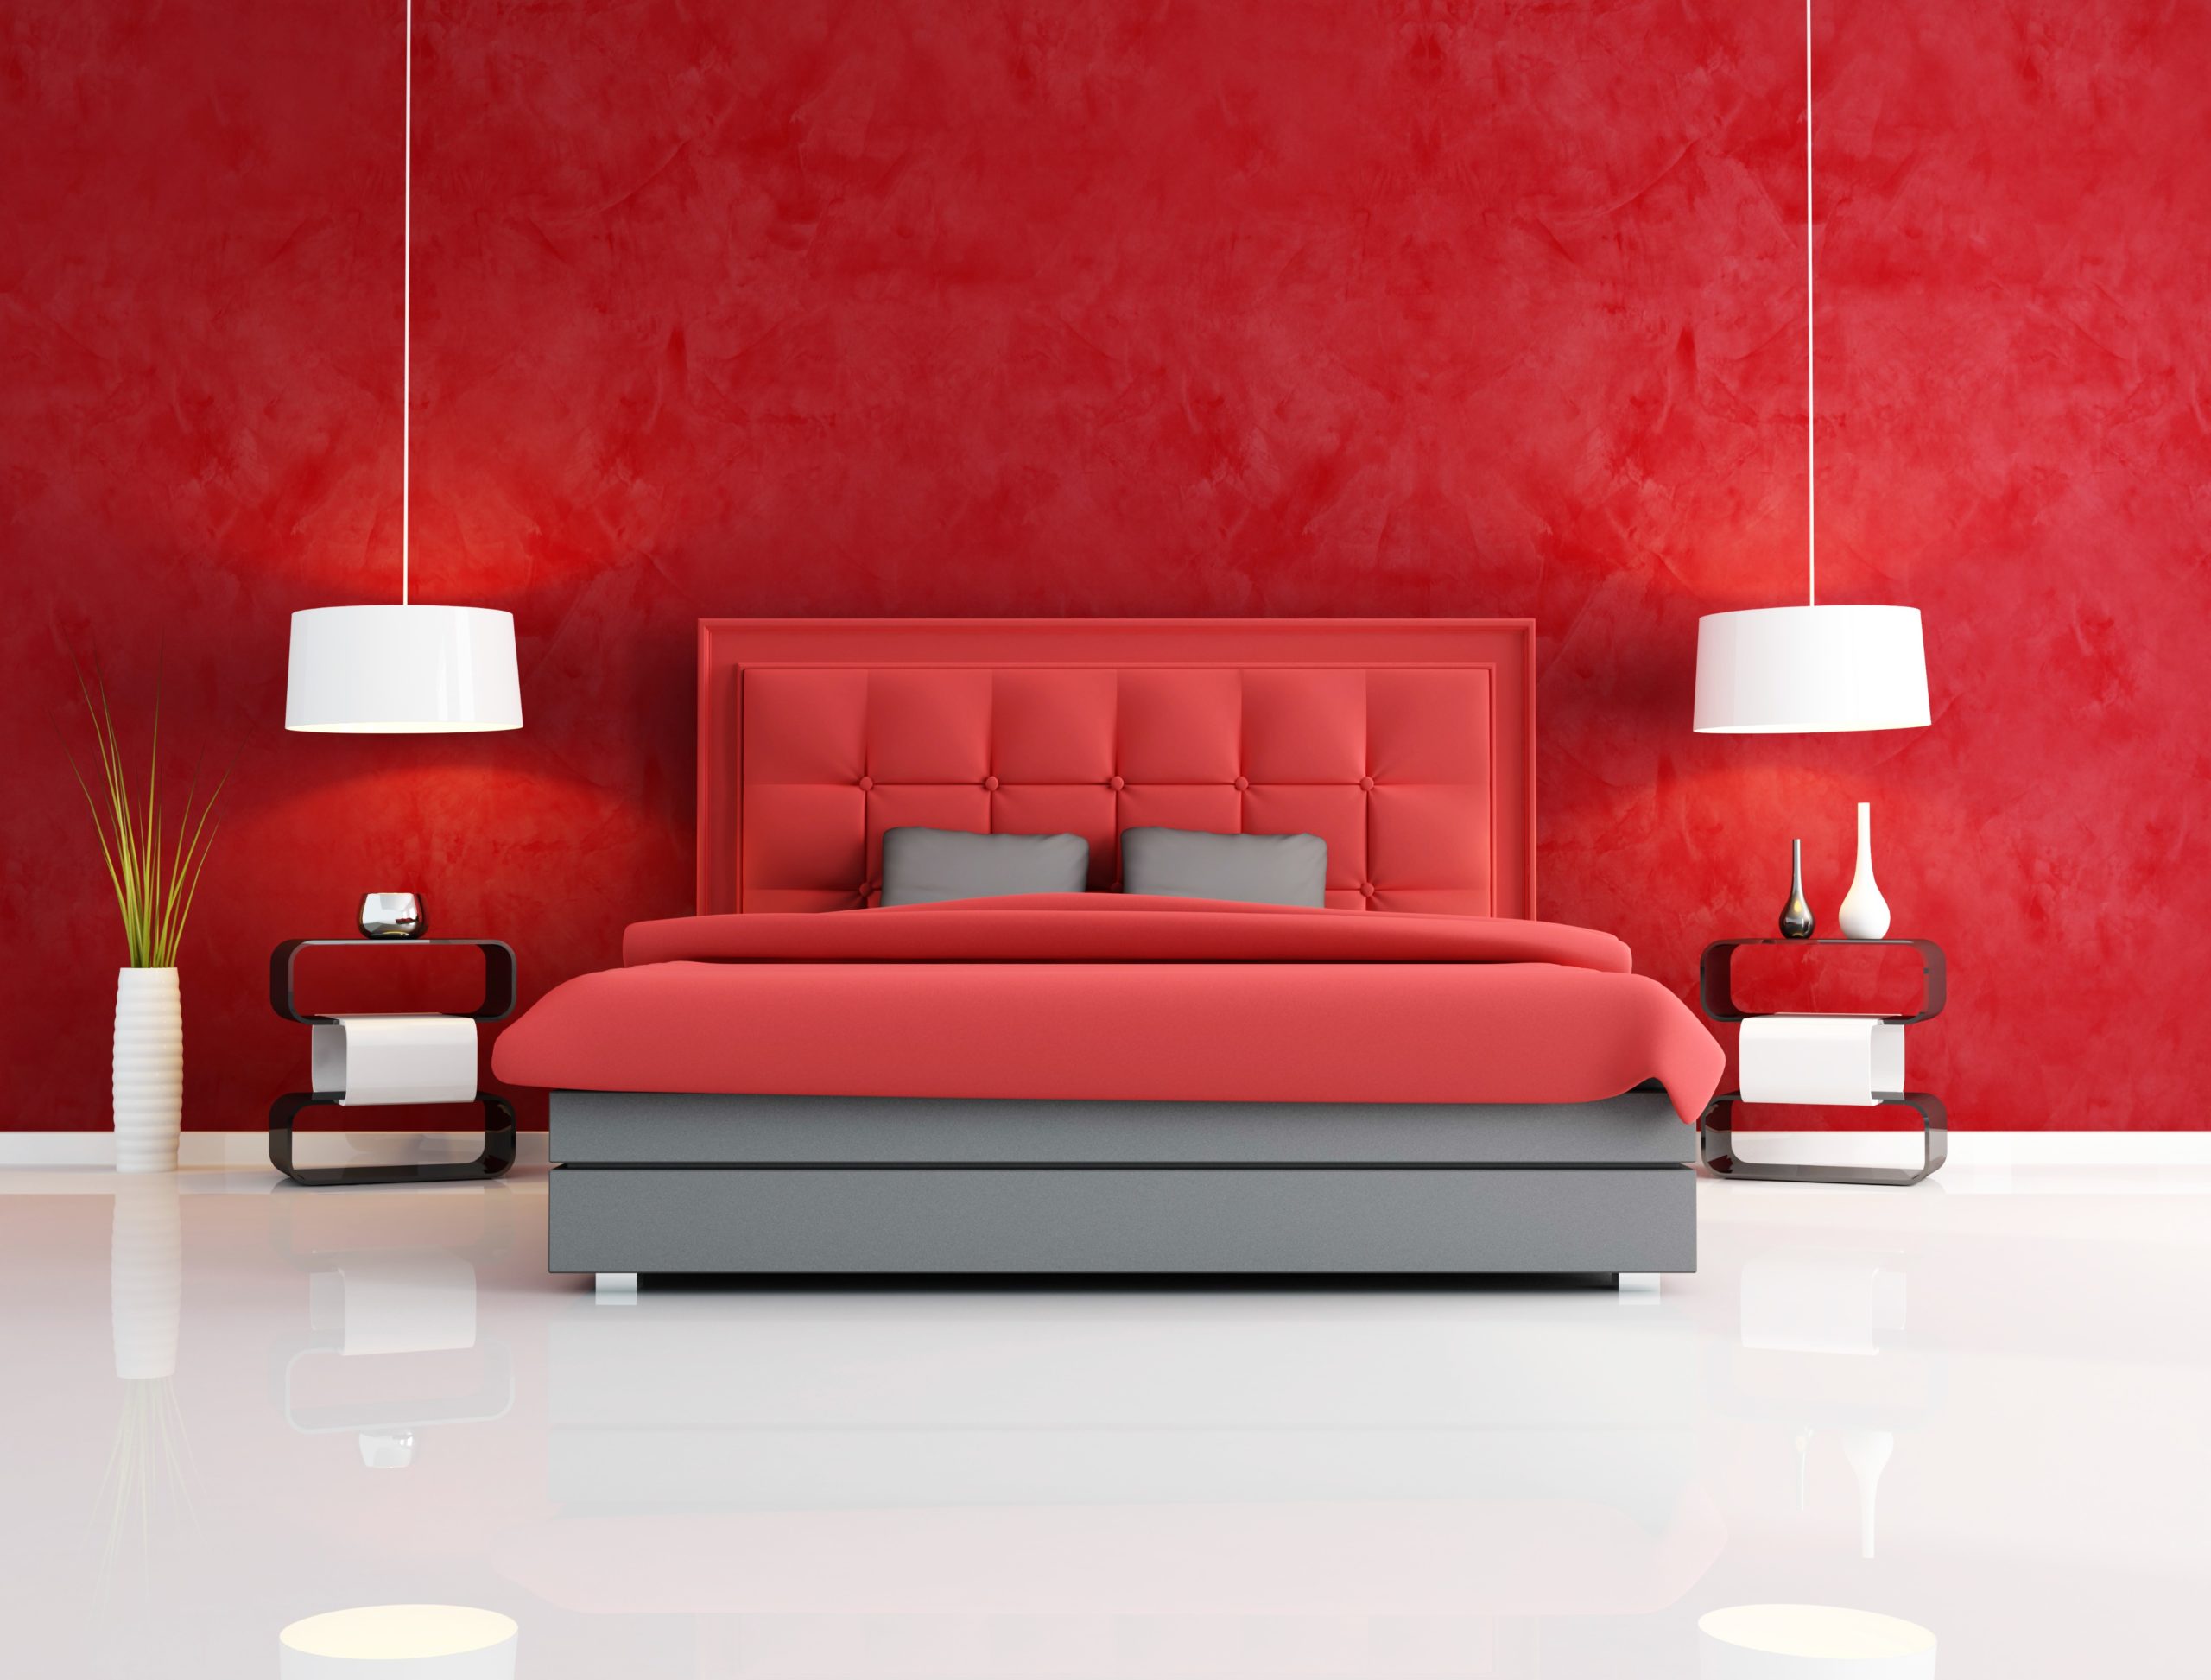 <img src="bedroom.jpg" alt="red bedroom reflects personality"/> 